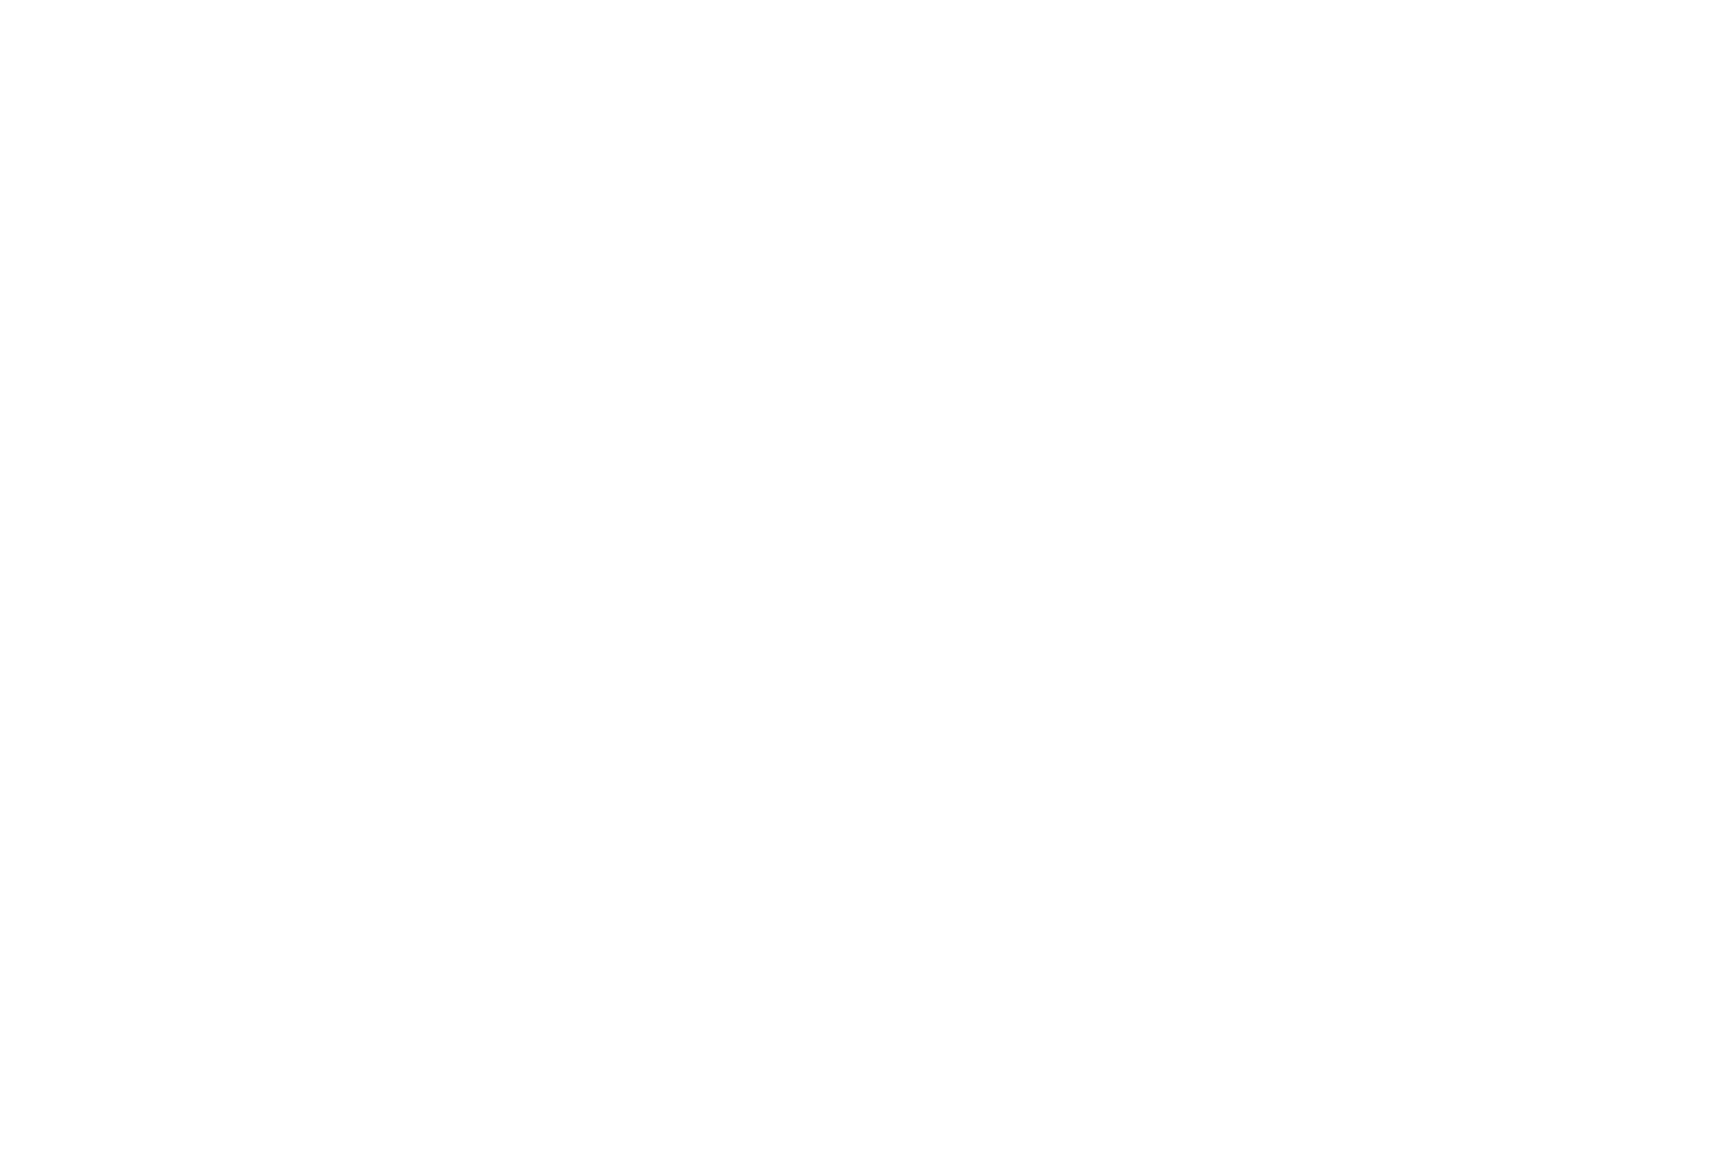 WINNER - BEST DIRECTOR LONG SHORT  - HANG ON TO YOUR SHORTS 2017.png